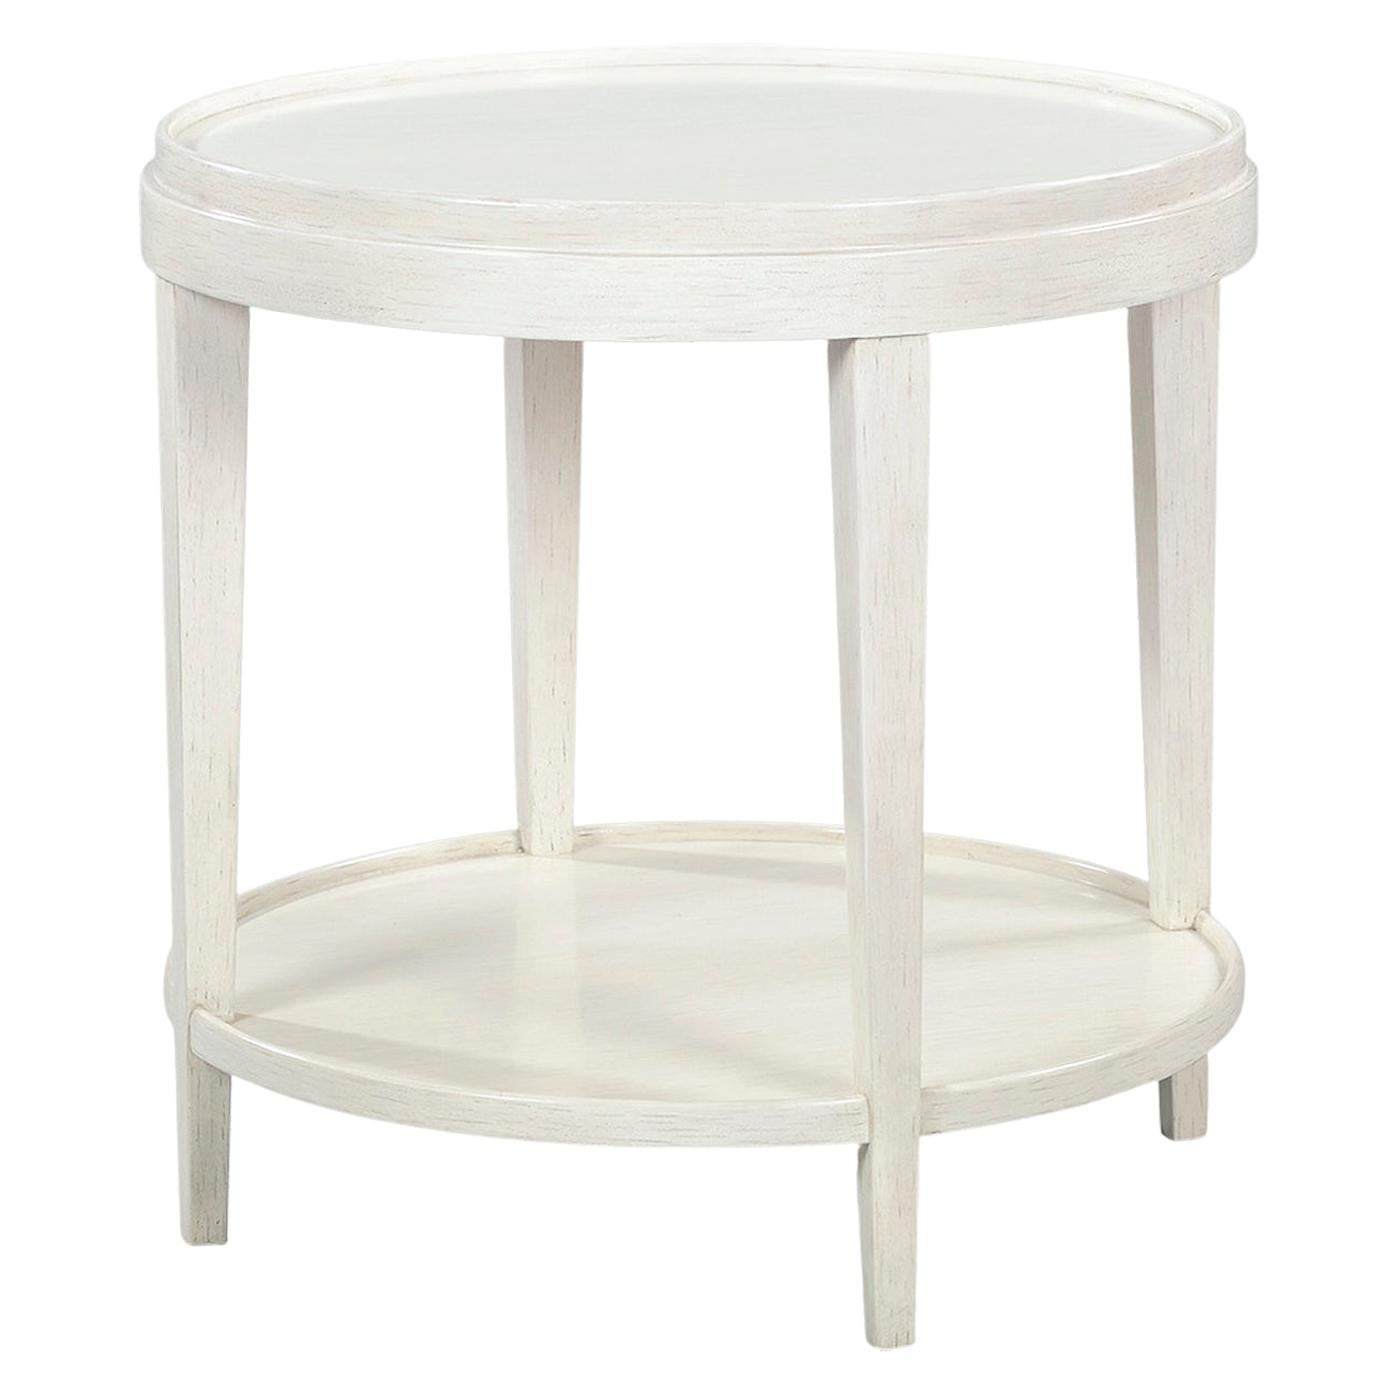 Classic Round End Table, Distressed White